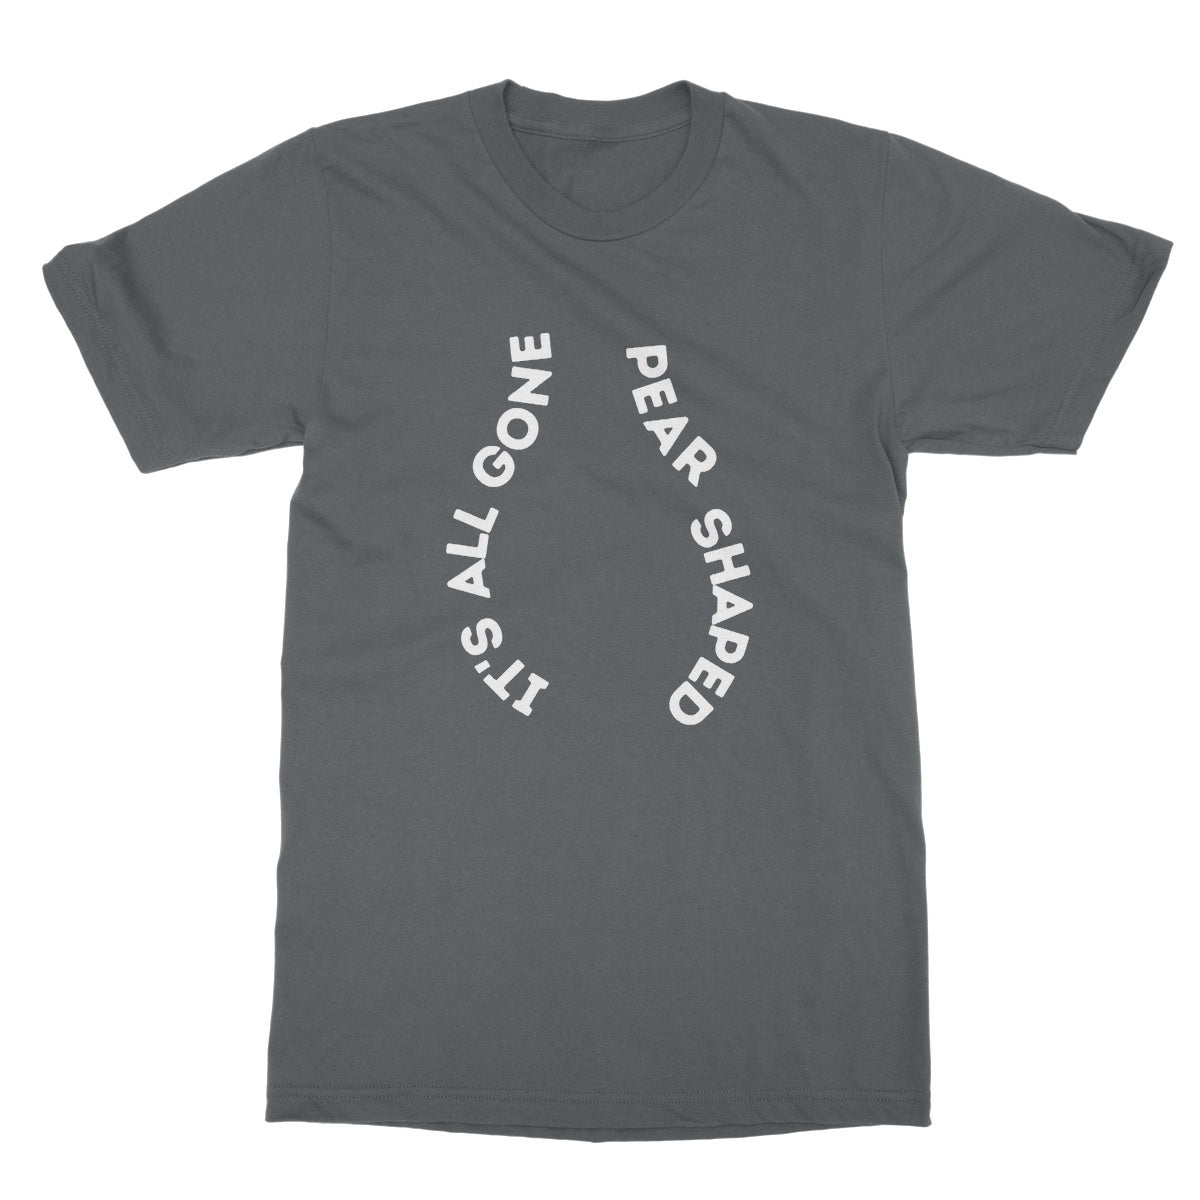 it's all gone pear shaped t shirt grey